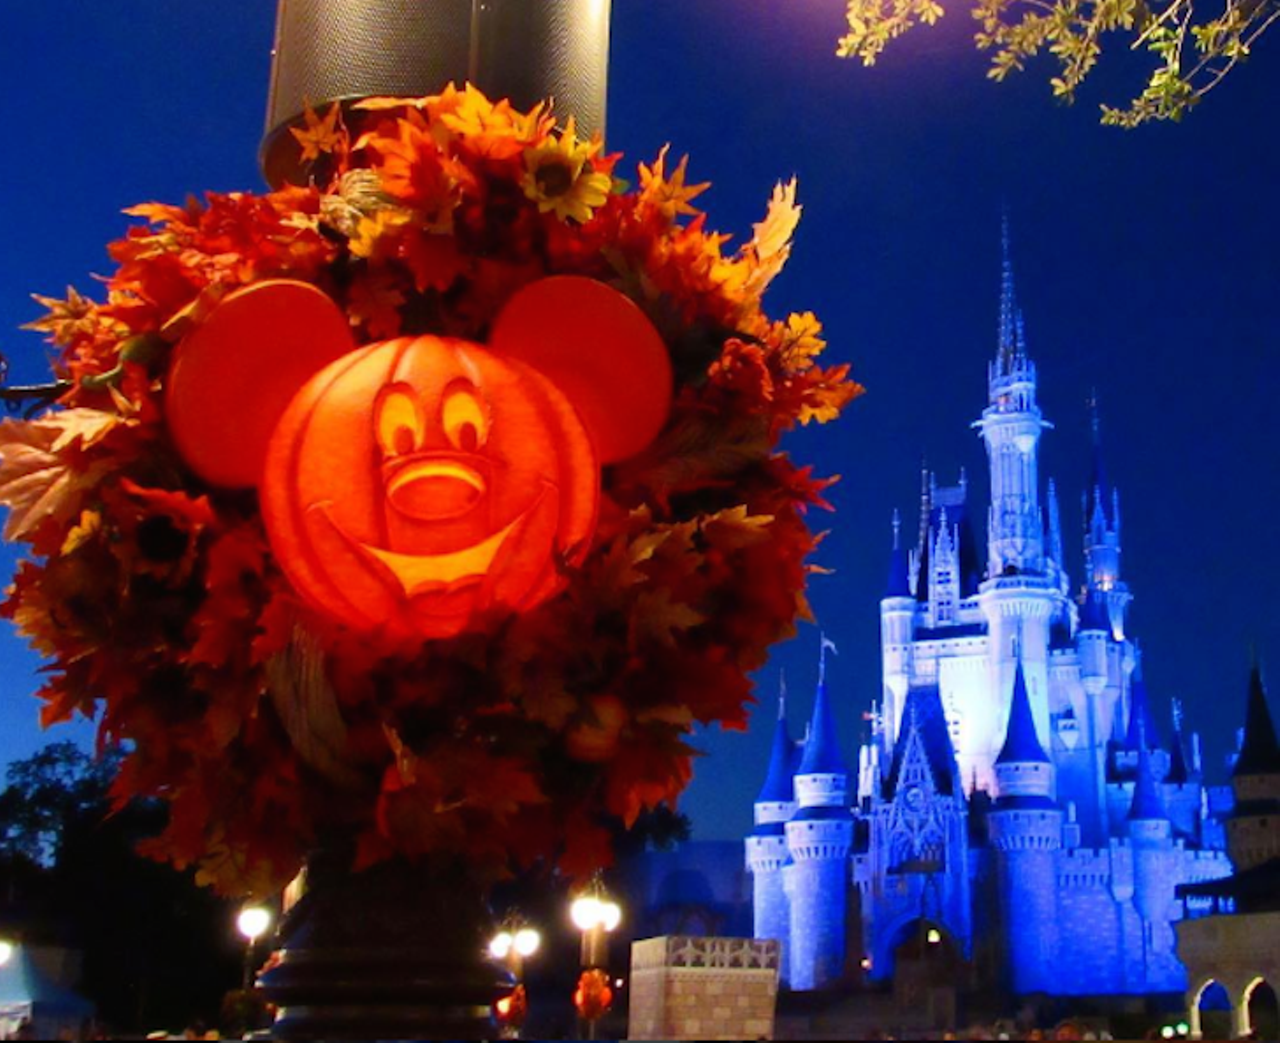 Mickey&#146;s Not-So-Scary Halloween Party
Select Nights Sept. 2-Oct. 31, Magic Kingdom, 3111 World Drive, 407-939-5277
The Magic Kingdom&#146;s annual halloween event includes special fireworks, a parade led by the headless horsemen, and trick-or-treating around the park. Guests of all ages are allowed to attend and are encouraged to wear costumes. Tickets start at $72. 
Photo via bowsbeadsbows/Instagram